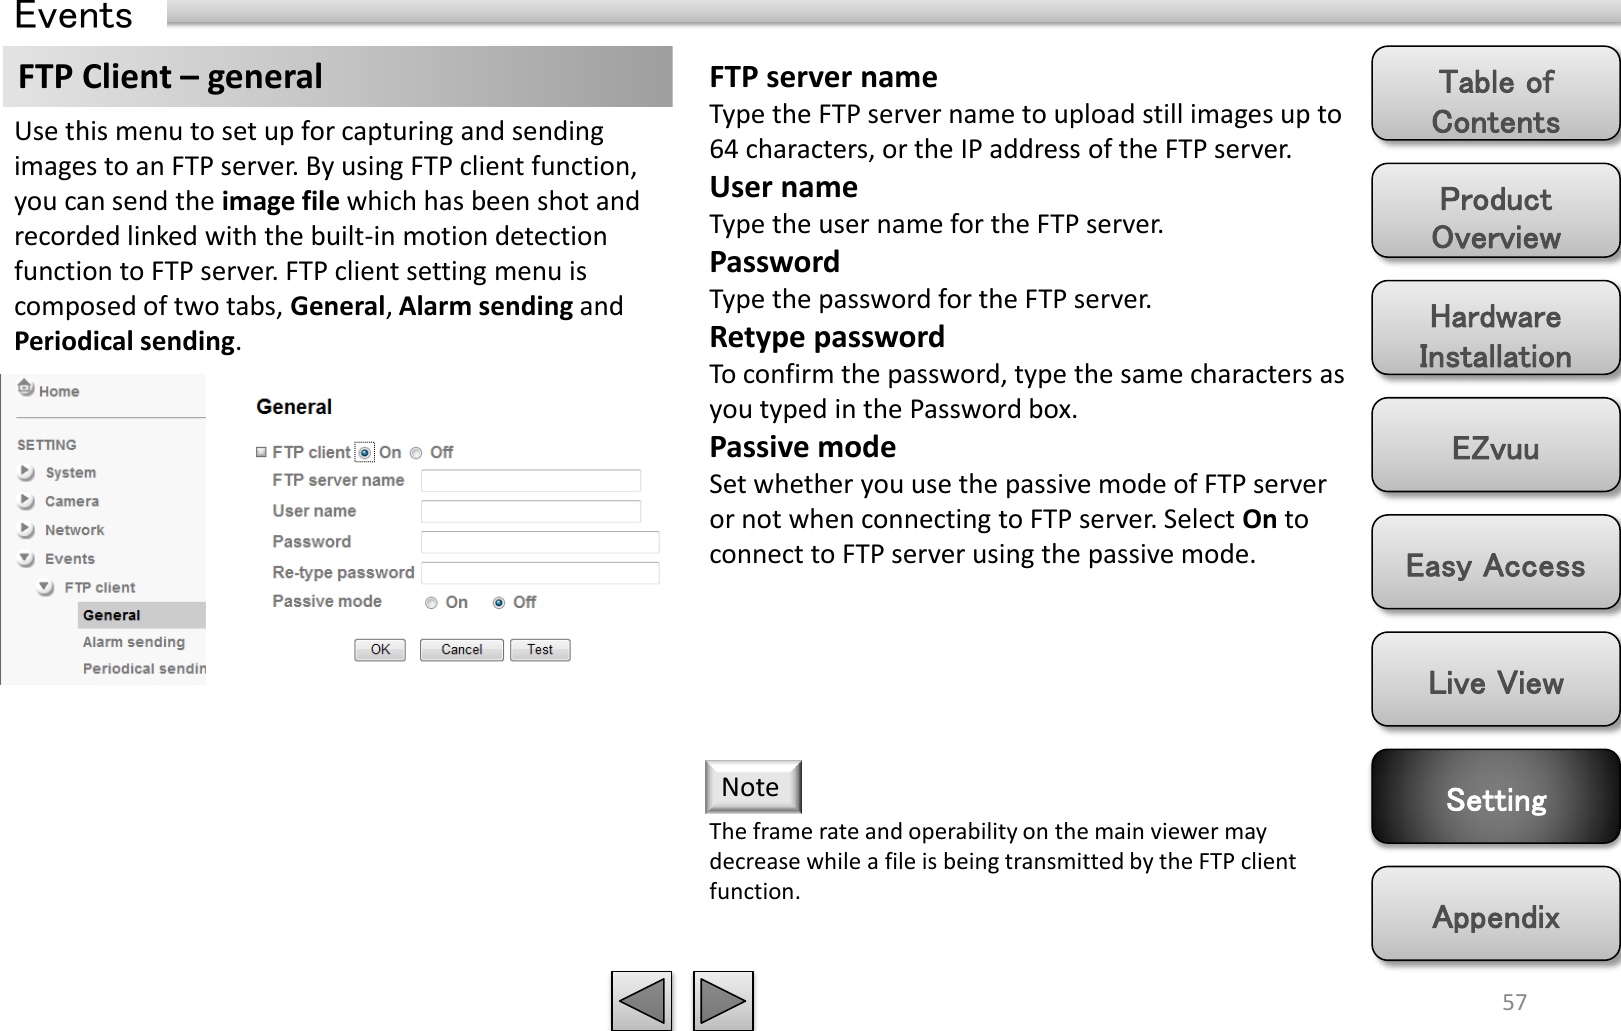 Product Overview Hardware Installation Easy Access EZvuu Setting Live View Appendix Table of Contents 57 Events FTP Client – general  FTP server name Type the FTP server name to upload still images up to 64 characters, or the IP address of the FTP server. User name Type the user name for the FTP server. Password Type the password for the FTP server. Retype password To confirm the password, type the same characters as you typed in the Password box. Passive mode Set whether you use the passive mode of FTP server or not when connecting to FTP server. Select On to connect to FTP server using the passive mode. Use this menu to set up for capturing and sending images to an FTP server. By using FTP client function, you can send the image file which has been shot and recorded linked with the built-in motion detection function to FTP server. FTP client setting menu is composed of two tabs, General, Alarm sending and Periodical sending. The frame rate and operability on the main viewer may decrease while a file is being transmitted by the FTP client function.  Note 